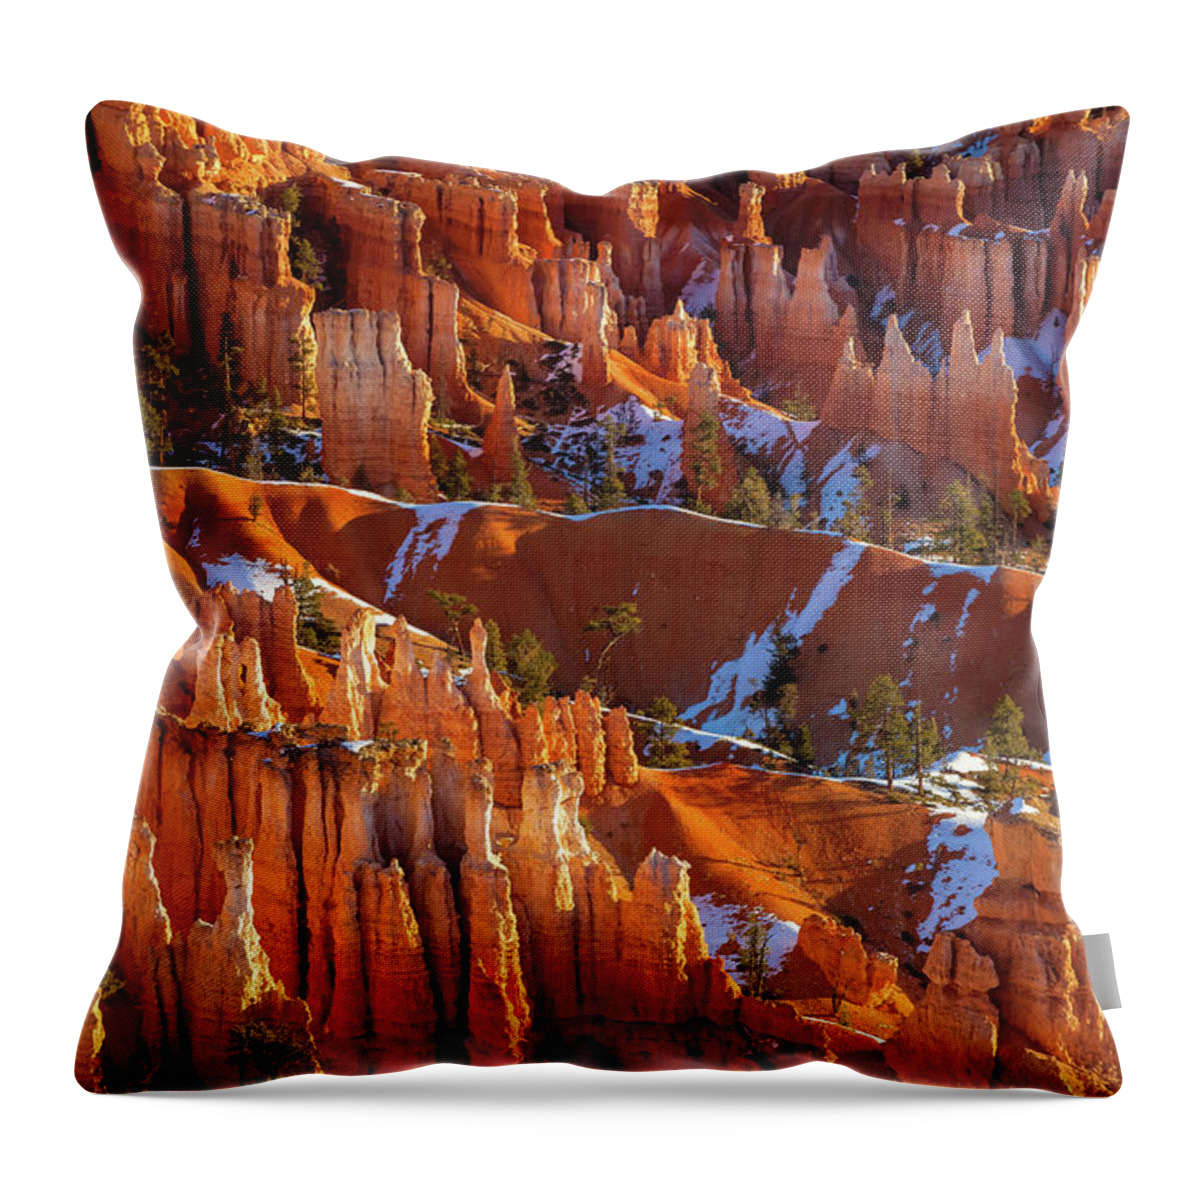 Natioanl Park Throw Pillow featuring the photograph The Hoodoos #1 by Jonathan Nguyen